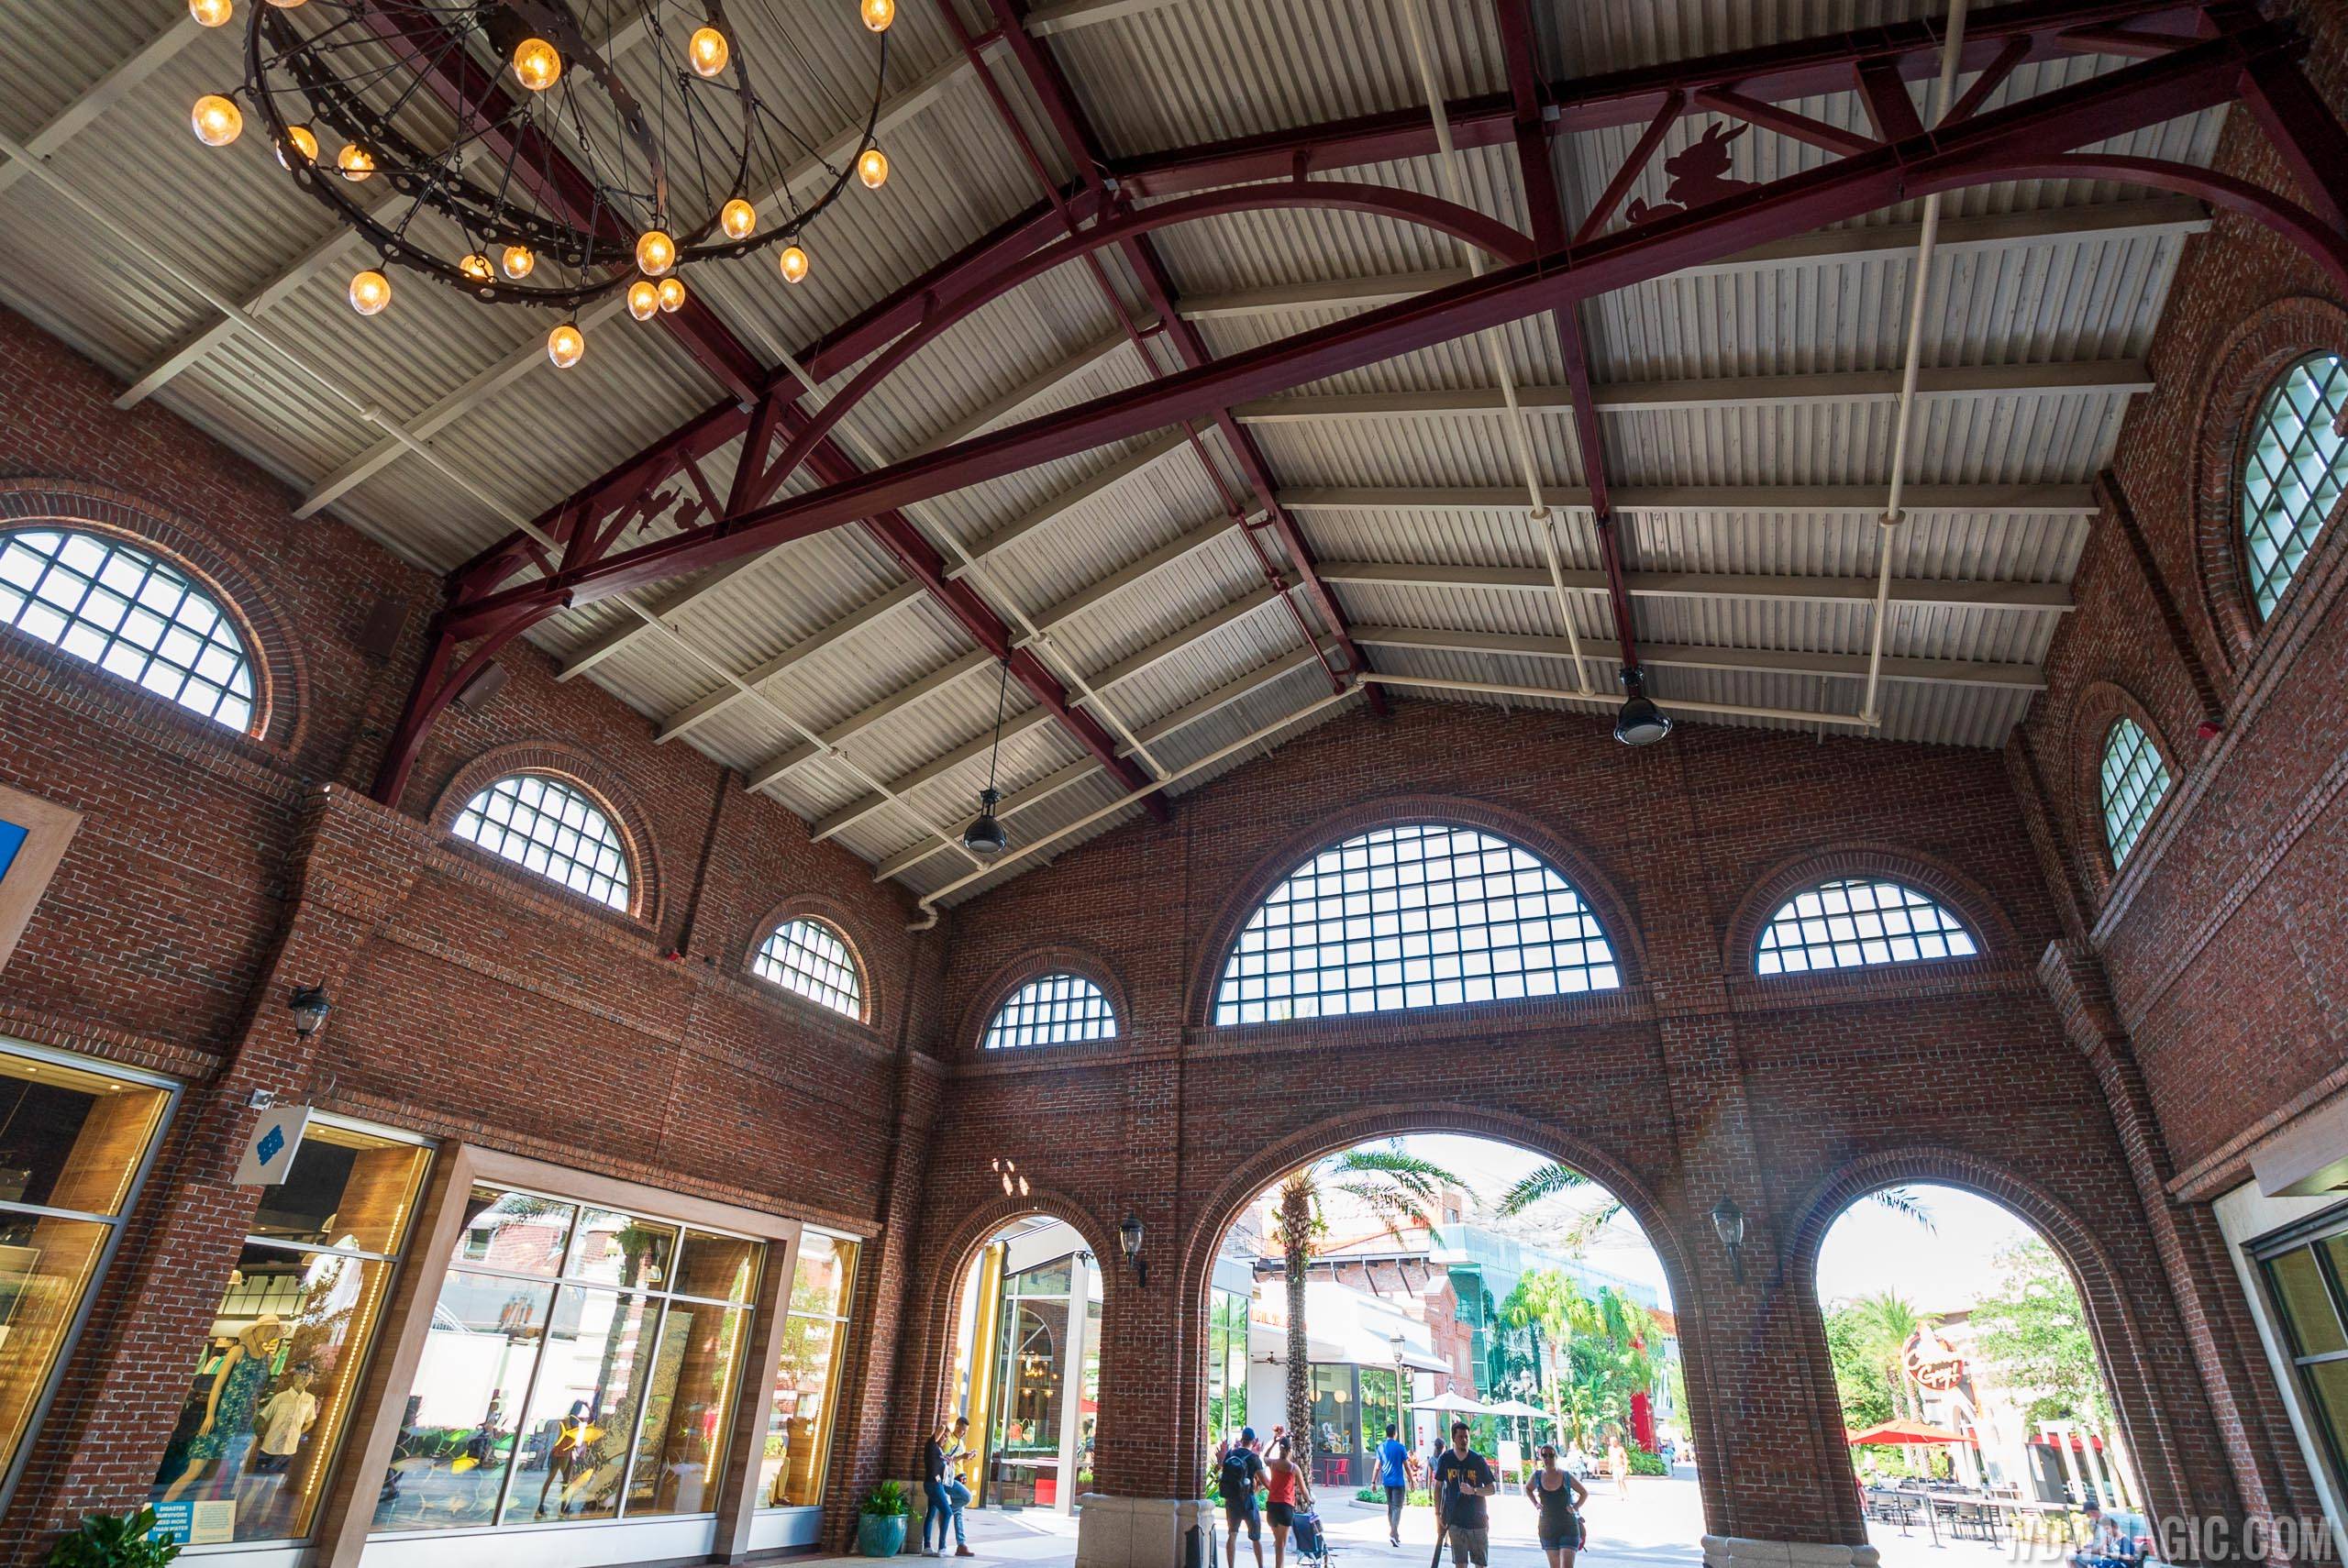 Additional decor added to Disney Springs Summer 2019